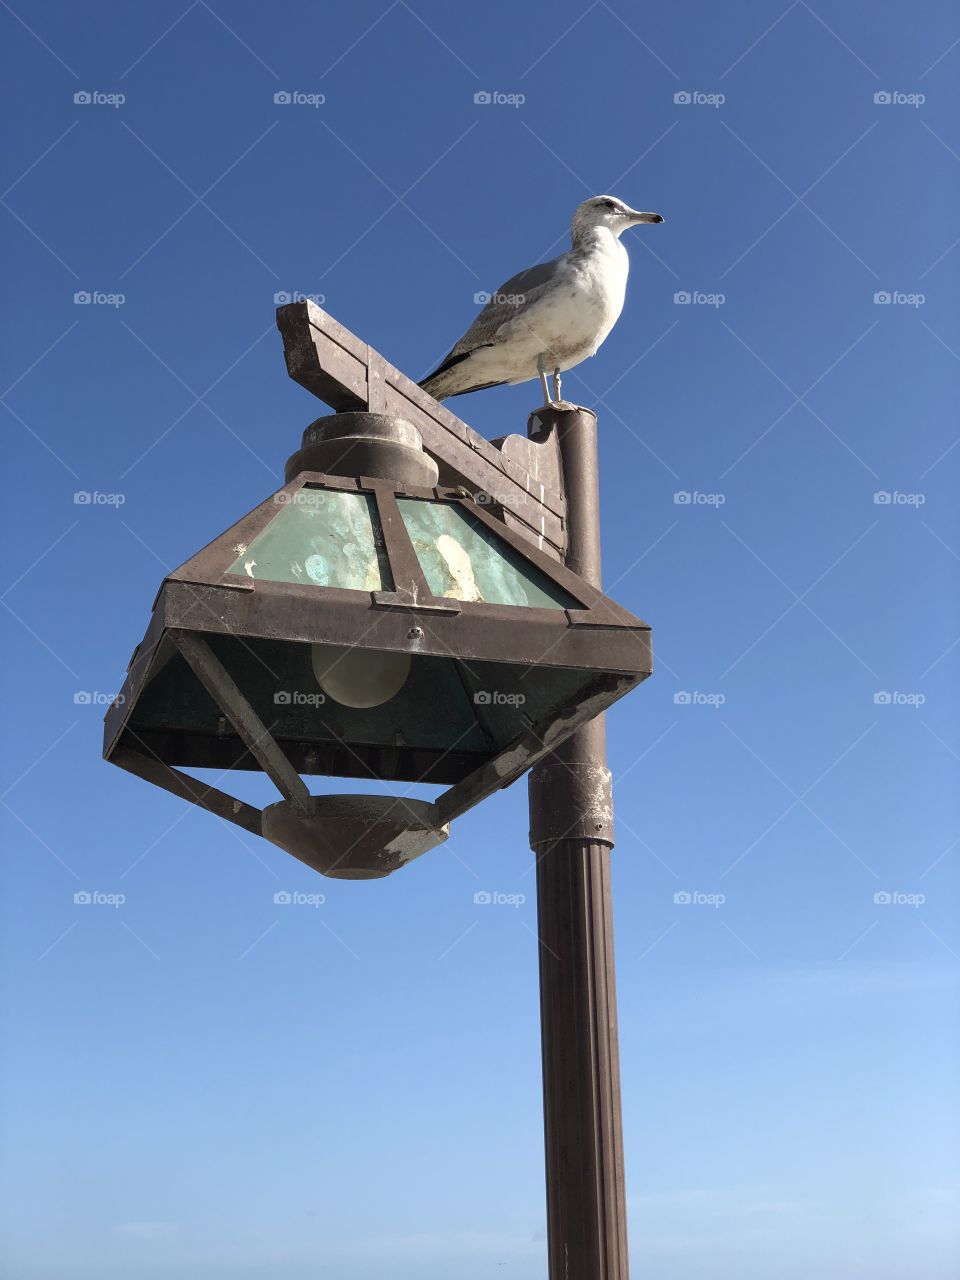 Seagull and Lamp